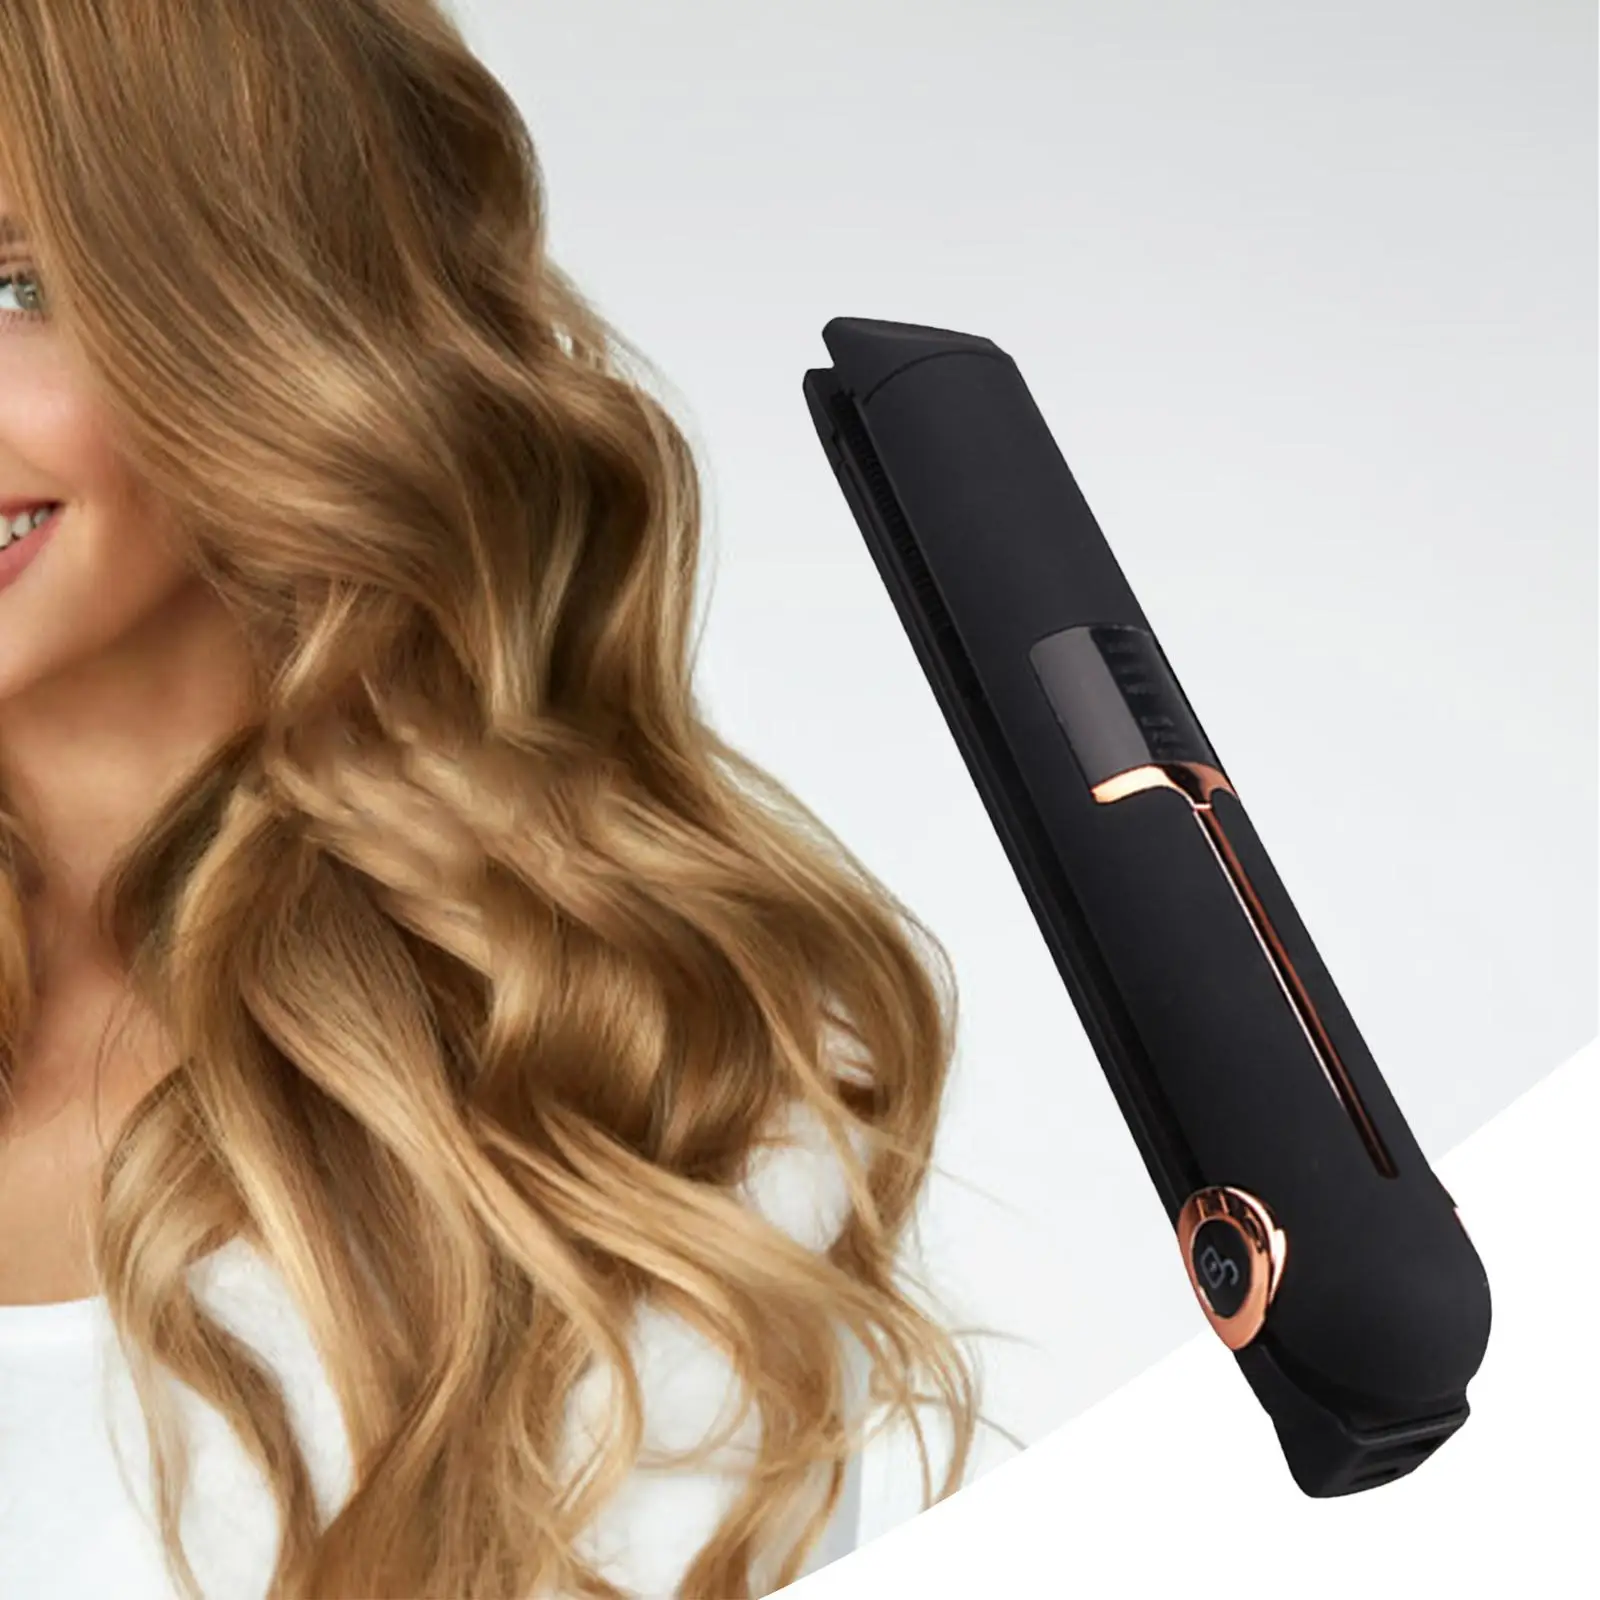 Cordless Hair Curler Straightener 3 Temp Full Automatic Fast Heating ABS Power Bank for Salon Hair Straightening DIY Travel Home